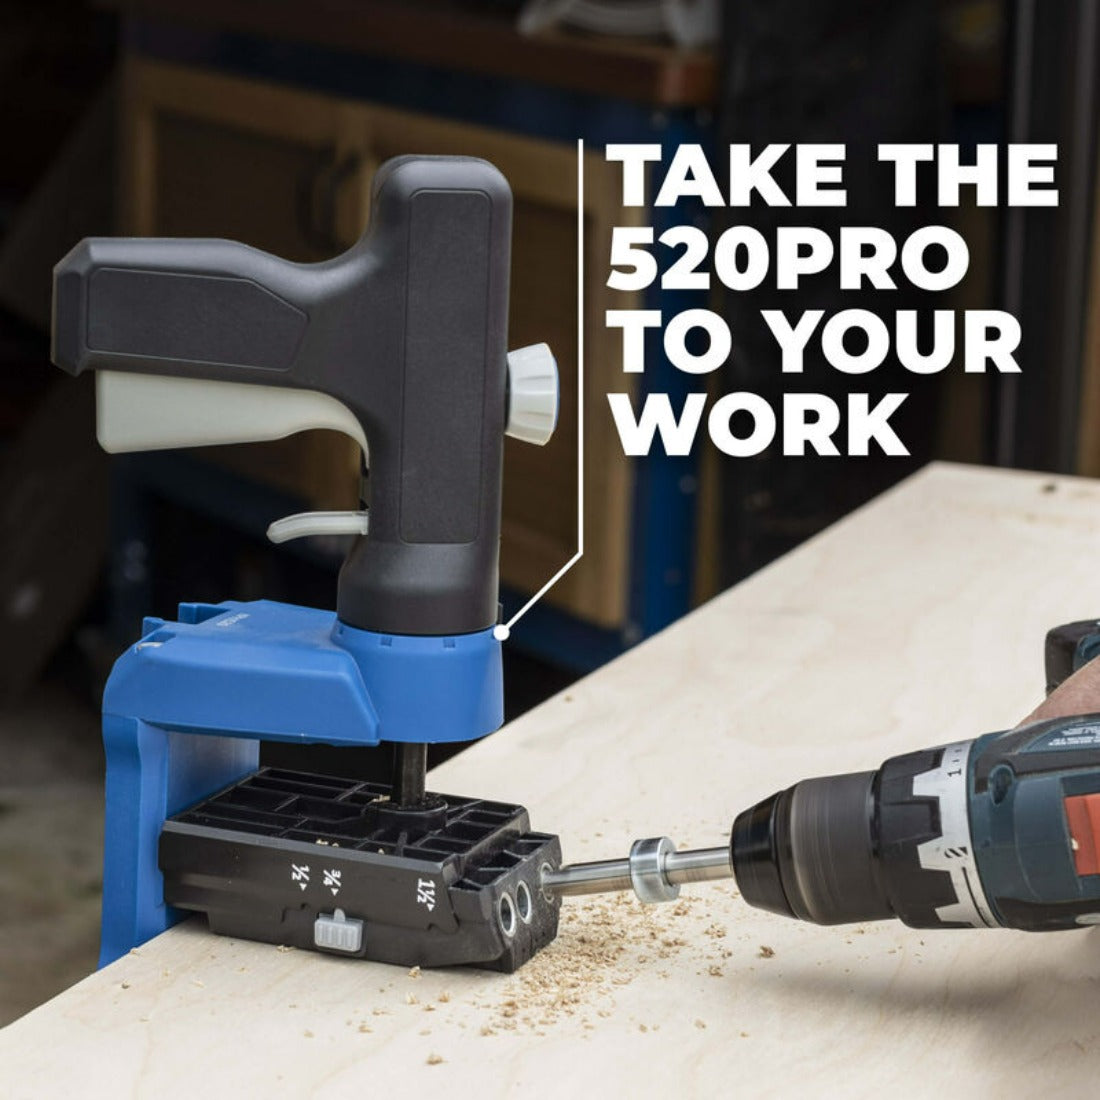 the 520pro jig is mounted to a flat sheet of timber for pocket drilled holes using a cordless drill. Description reads, "take the 520pro to your work"